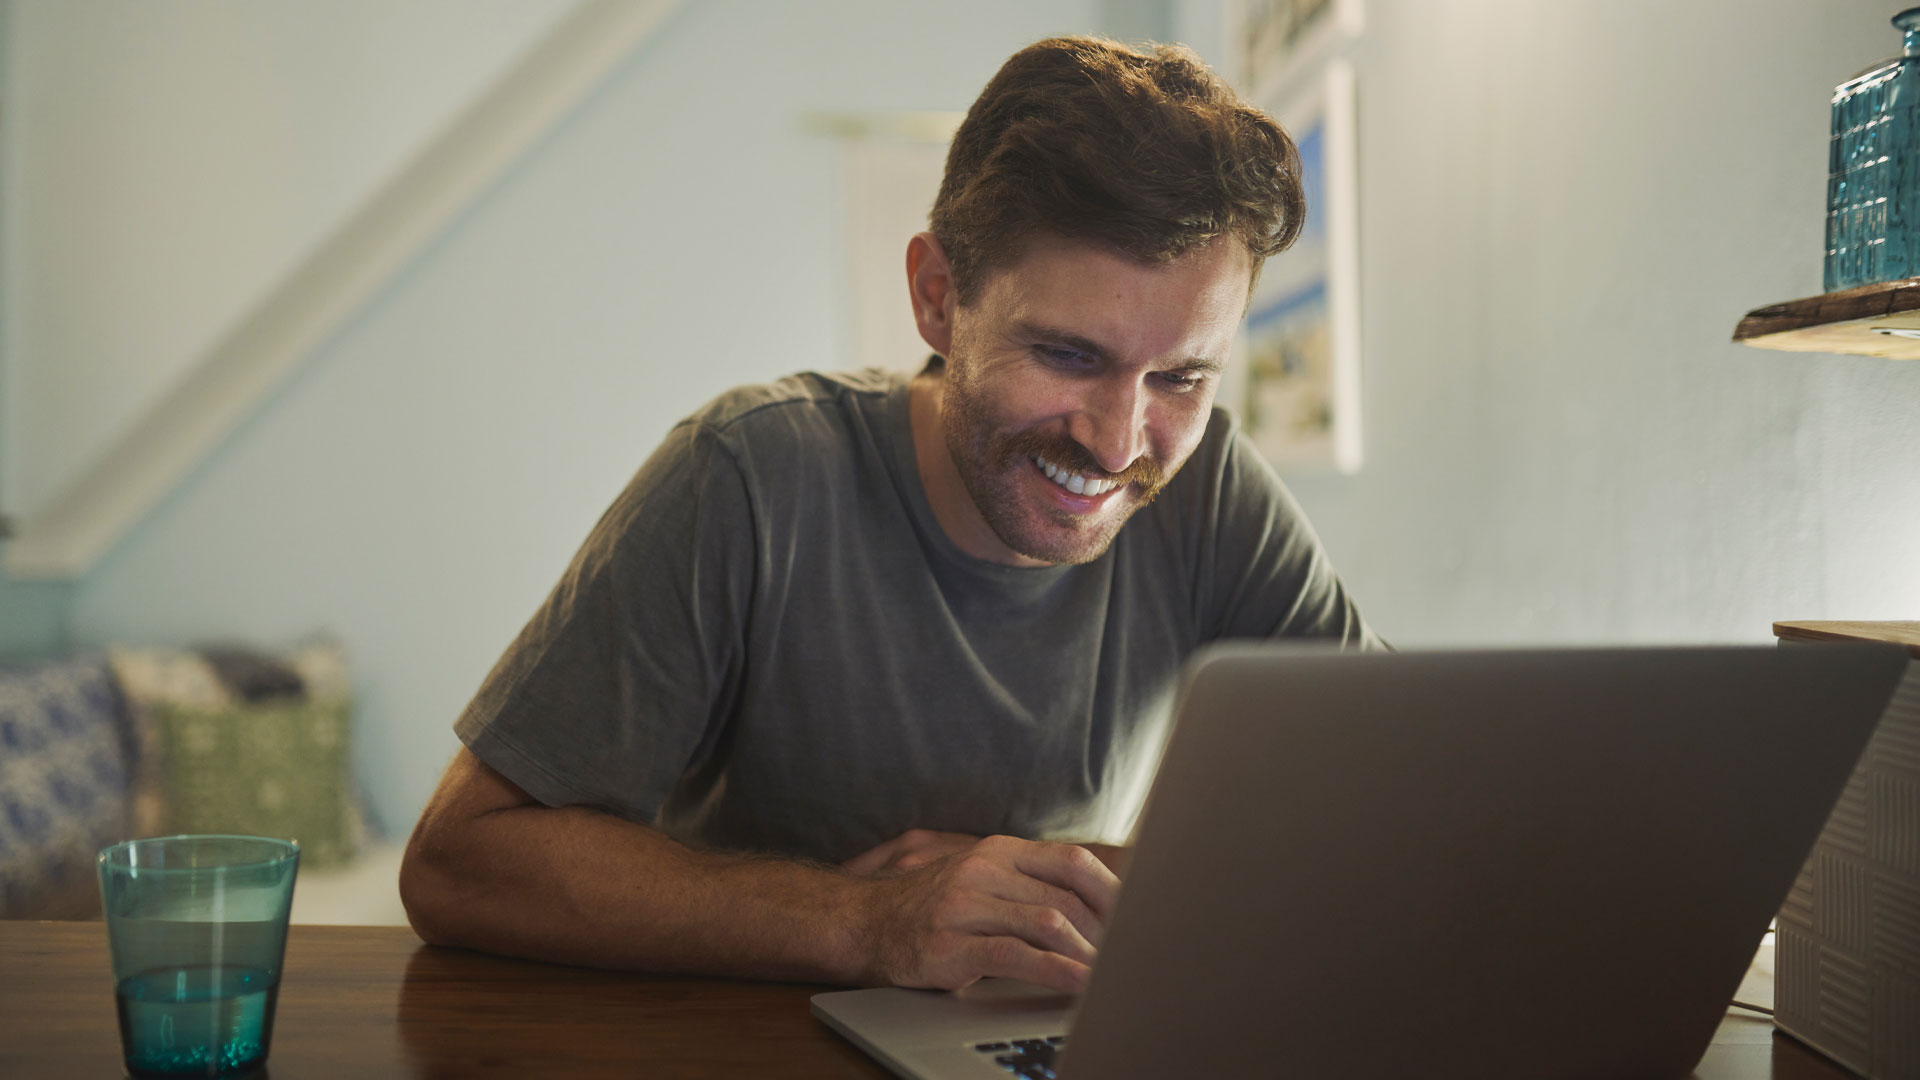 Man smiling at his laptop as he searches for jobs online.